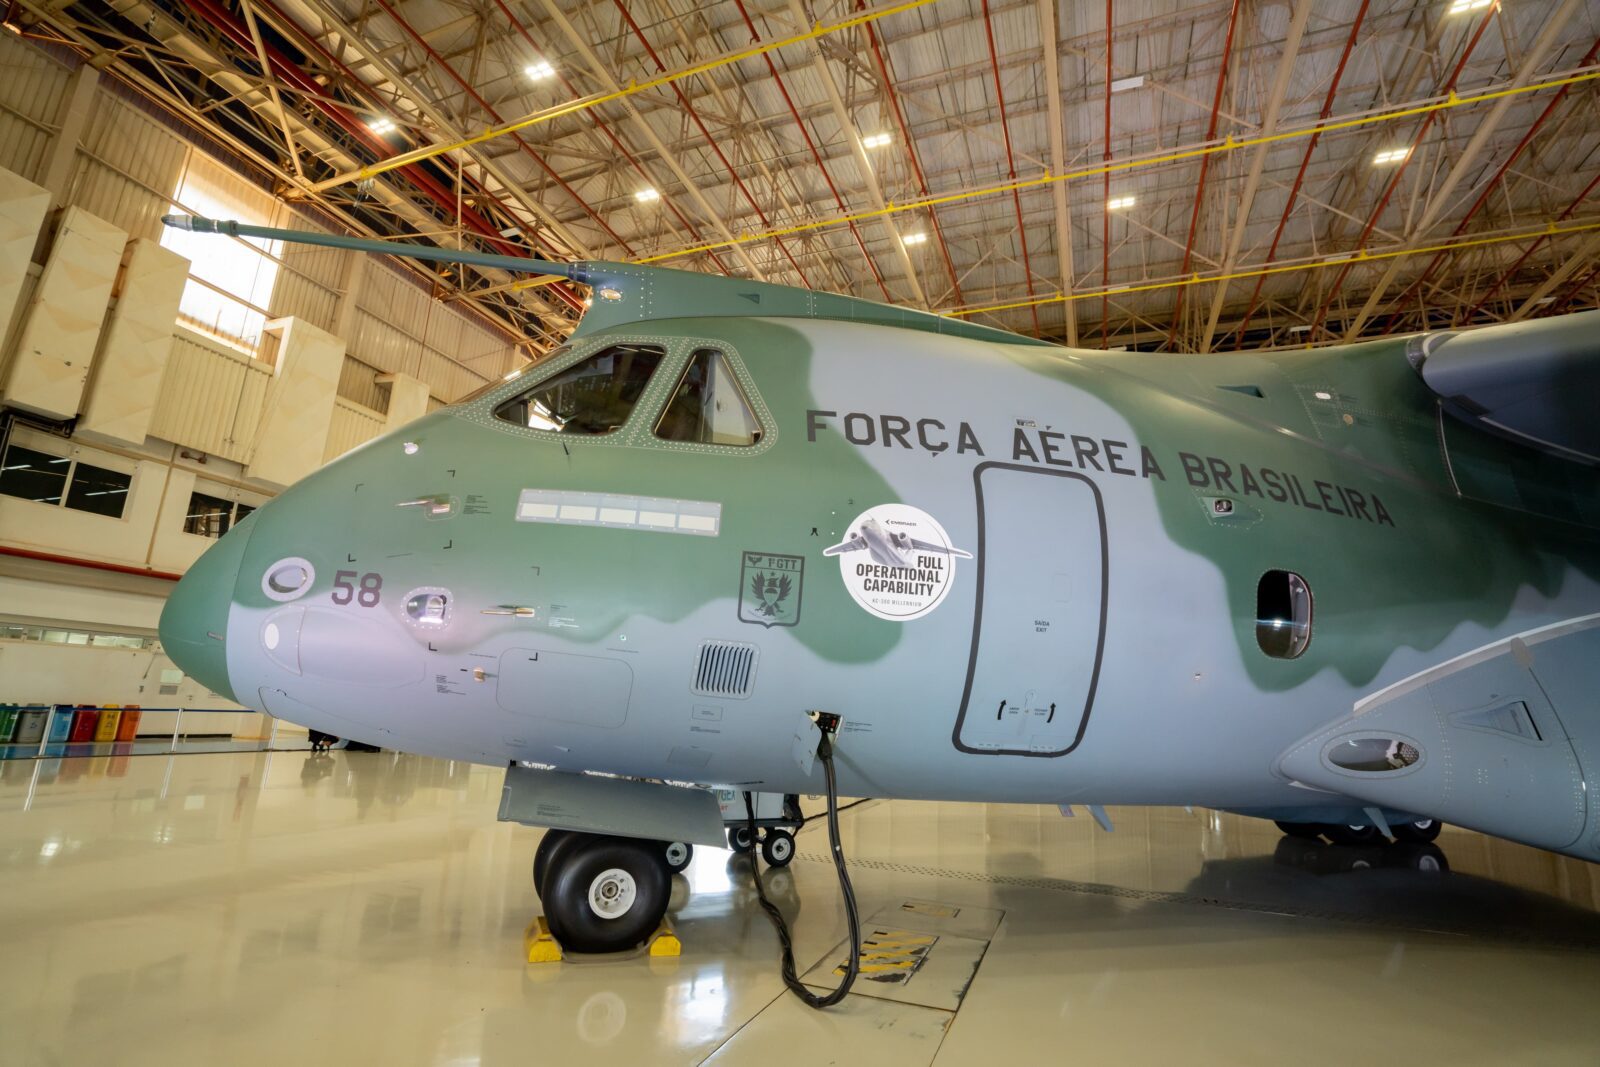 Embraer and FAB Celebrate Receiving the Full Operational Capability (FOC) for the C-390 Millennium multi-mission aircraft